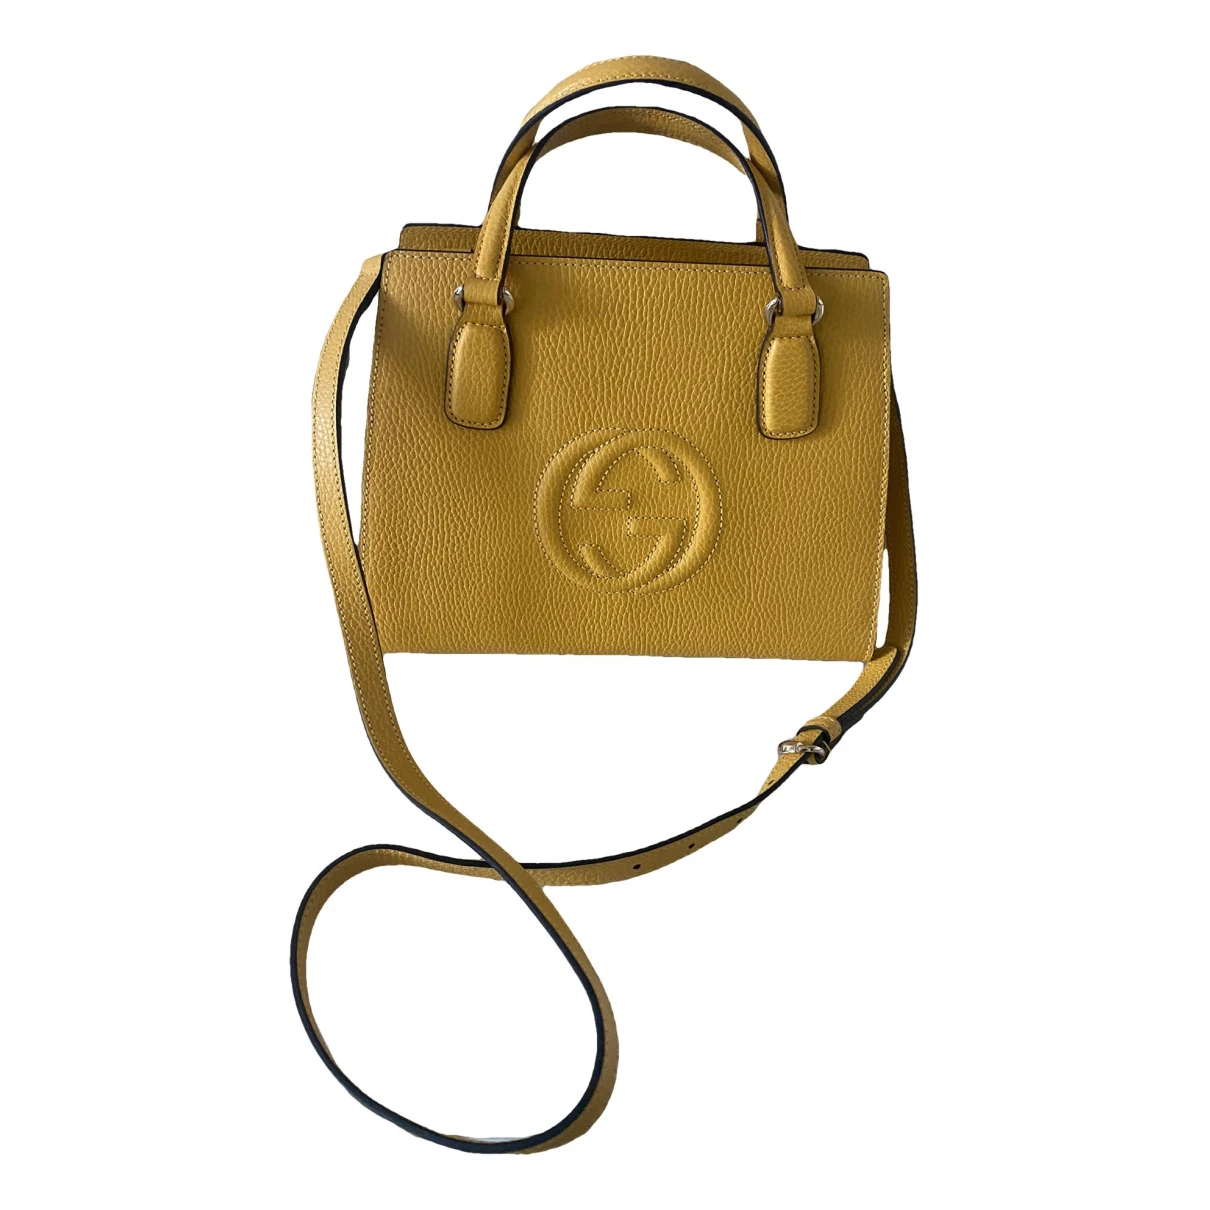 Pre-owned Gucci Soho Leather Tote In Yellow